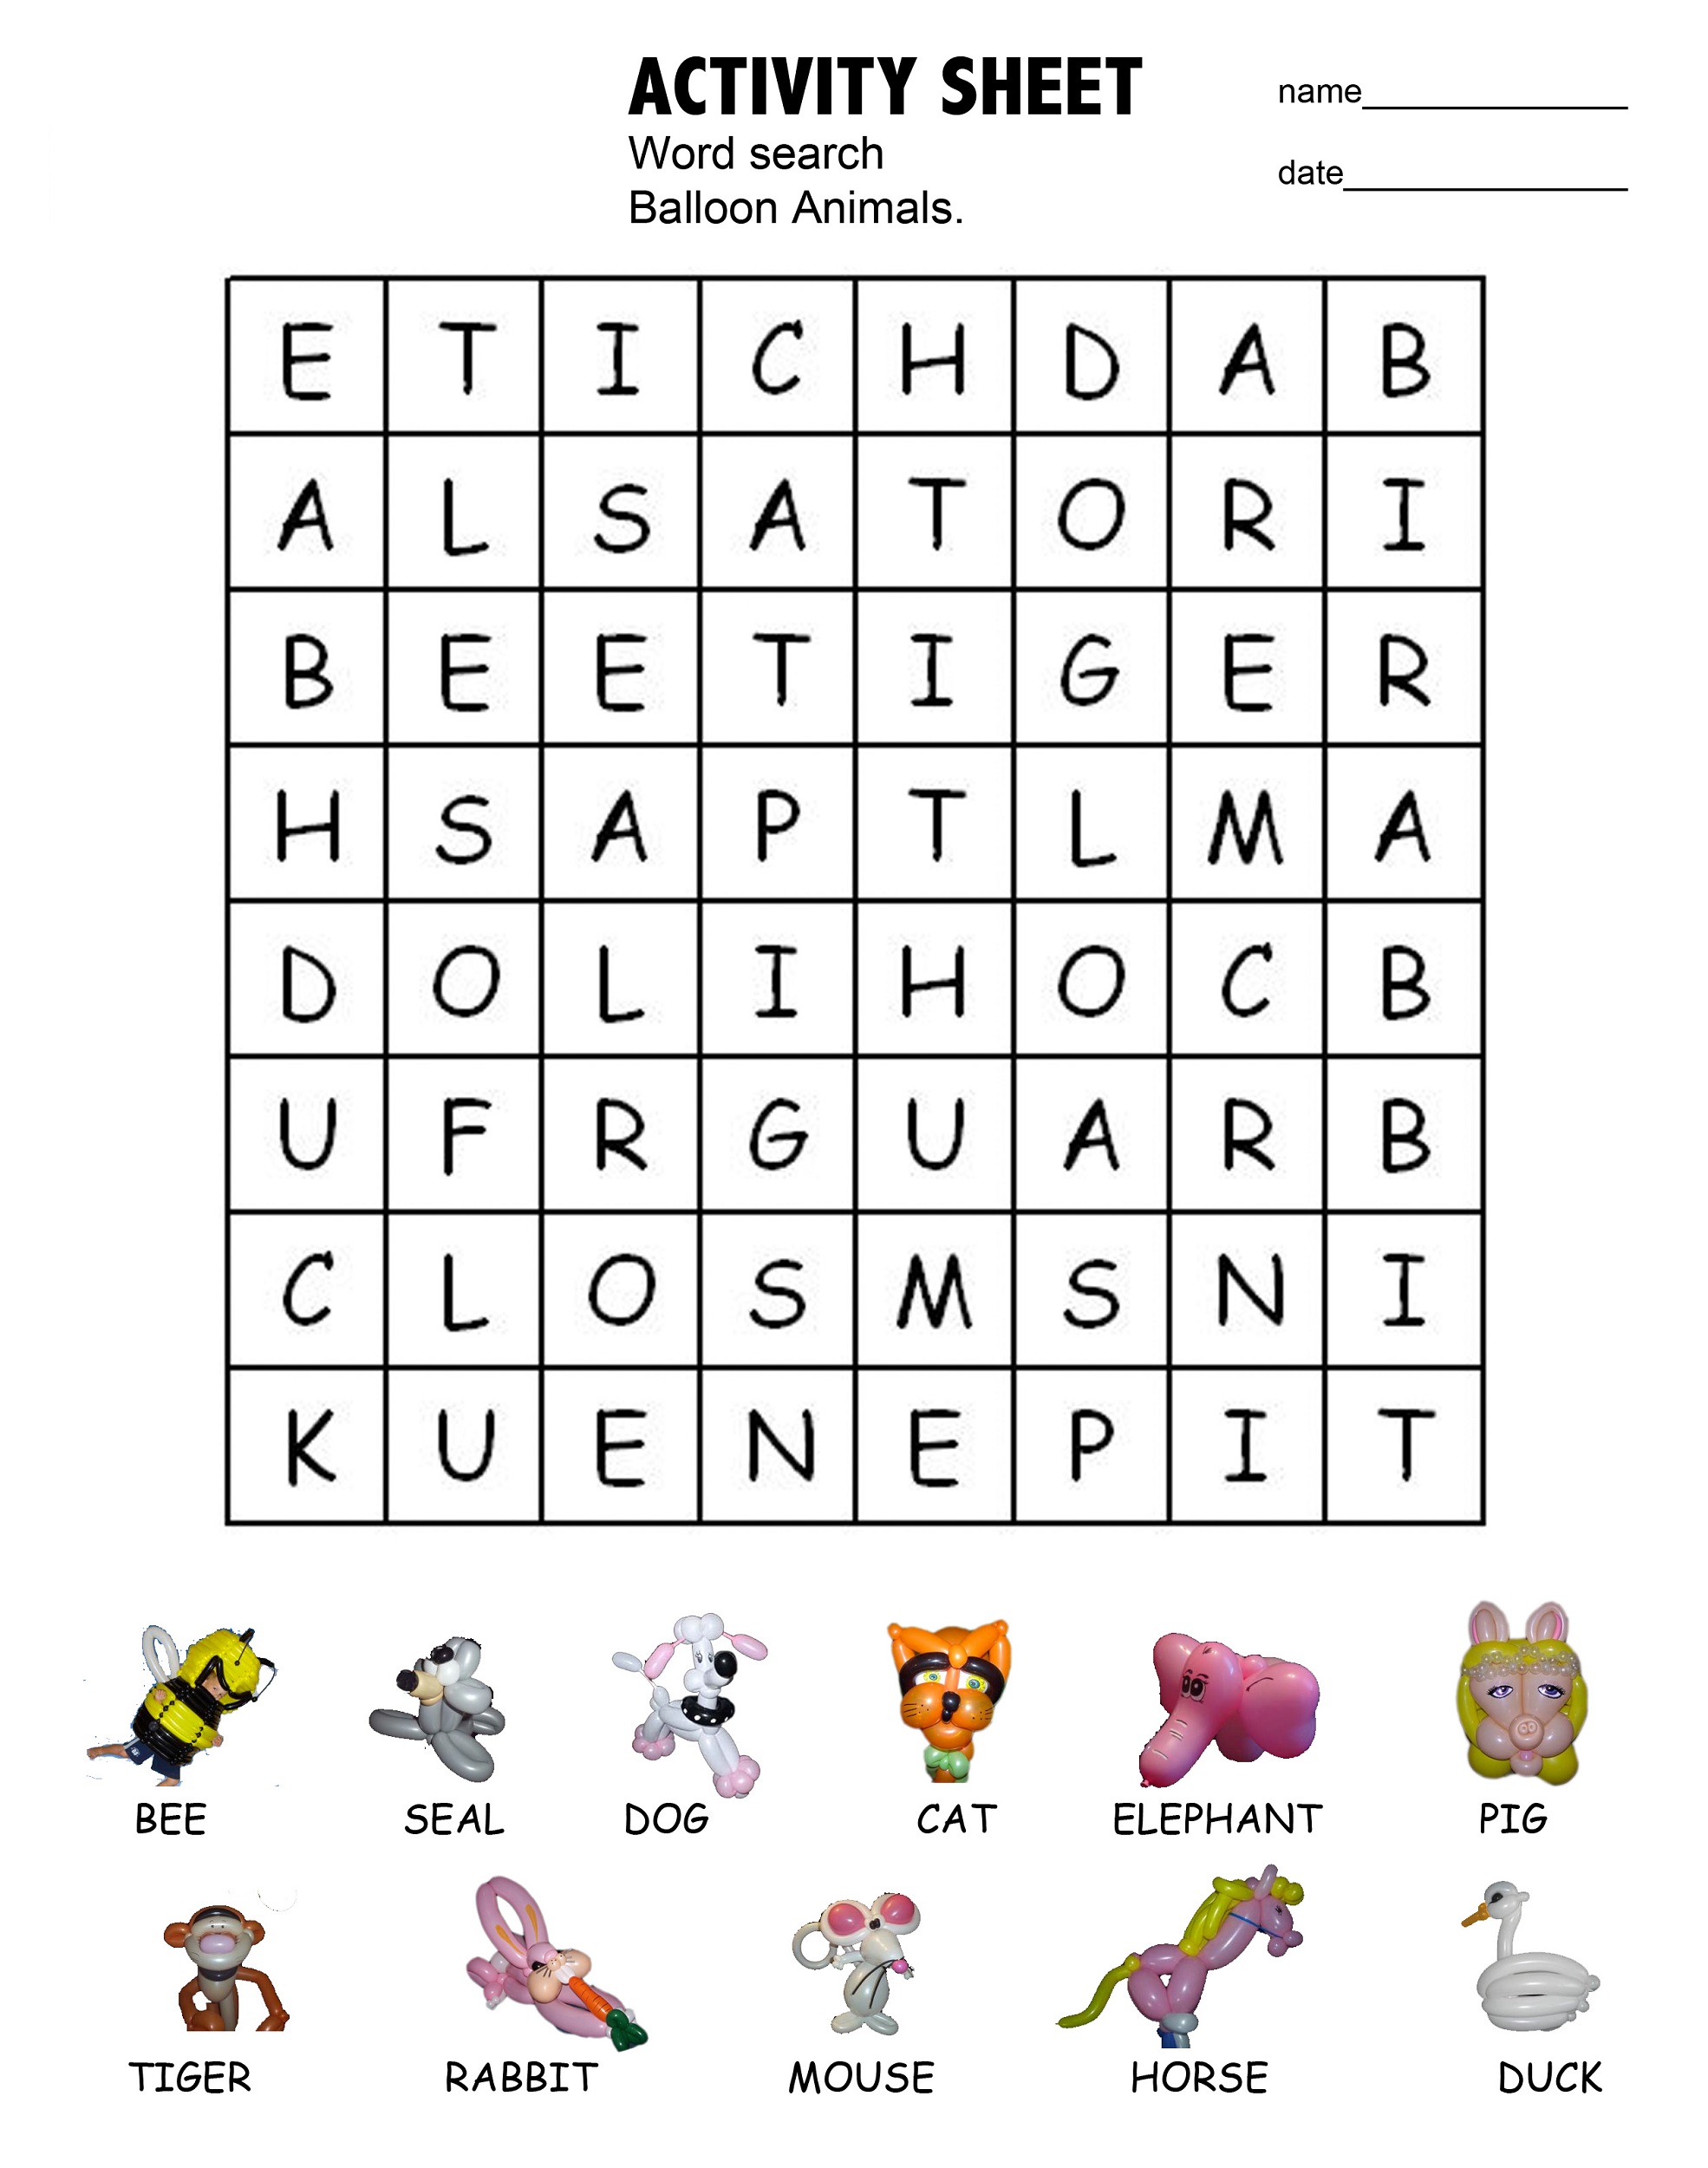 zoo animals word search free printable - zoo animals word search puzzle ...